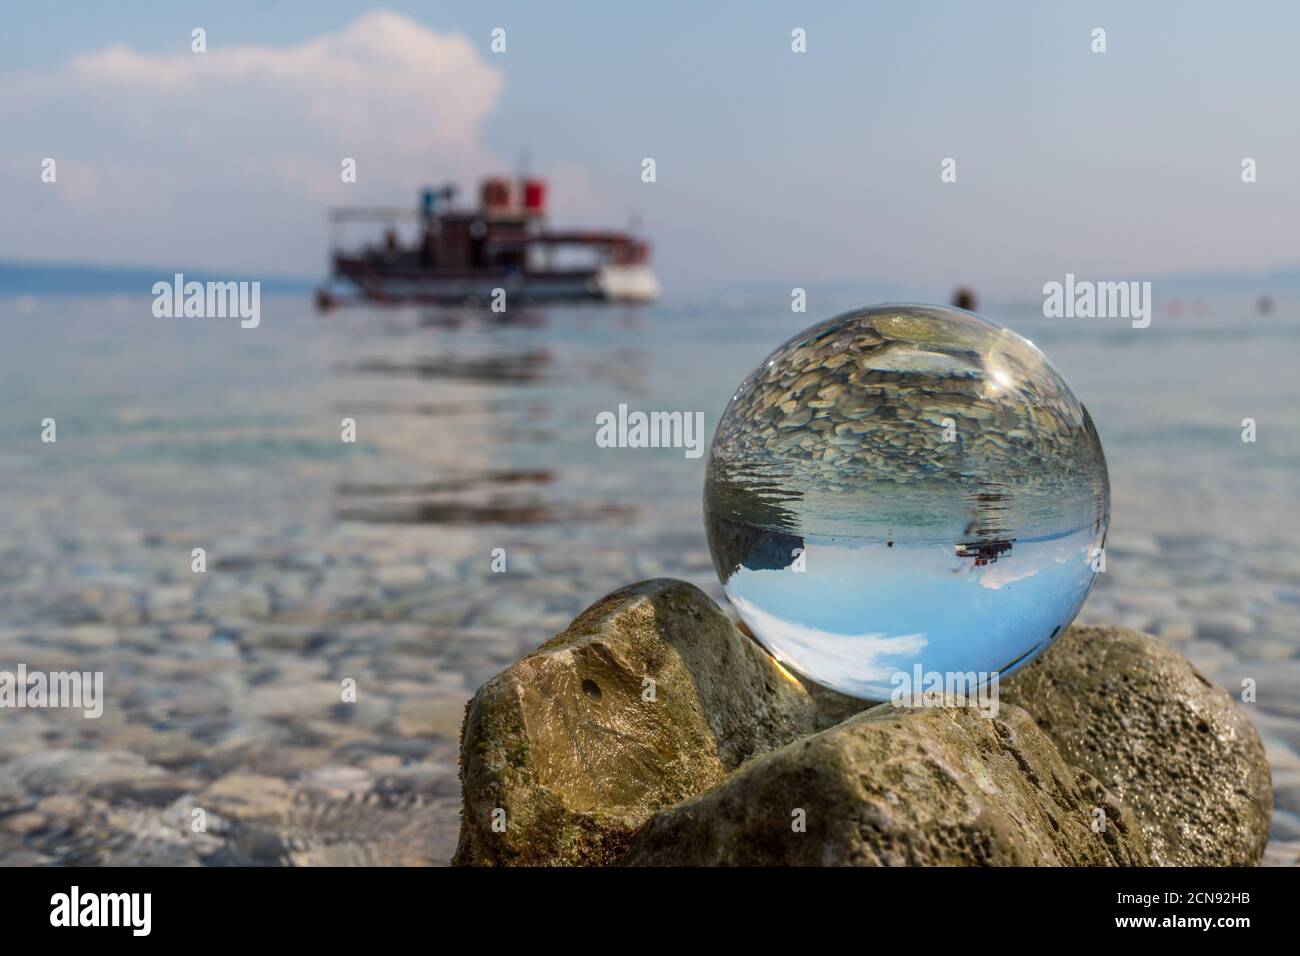 Crystal ball on stones near the sea. Original upside down view and rounded perspective of the sky, pebble seabed and boat. Original and engaging pictu Stock Photo